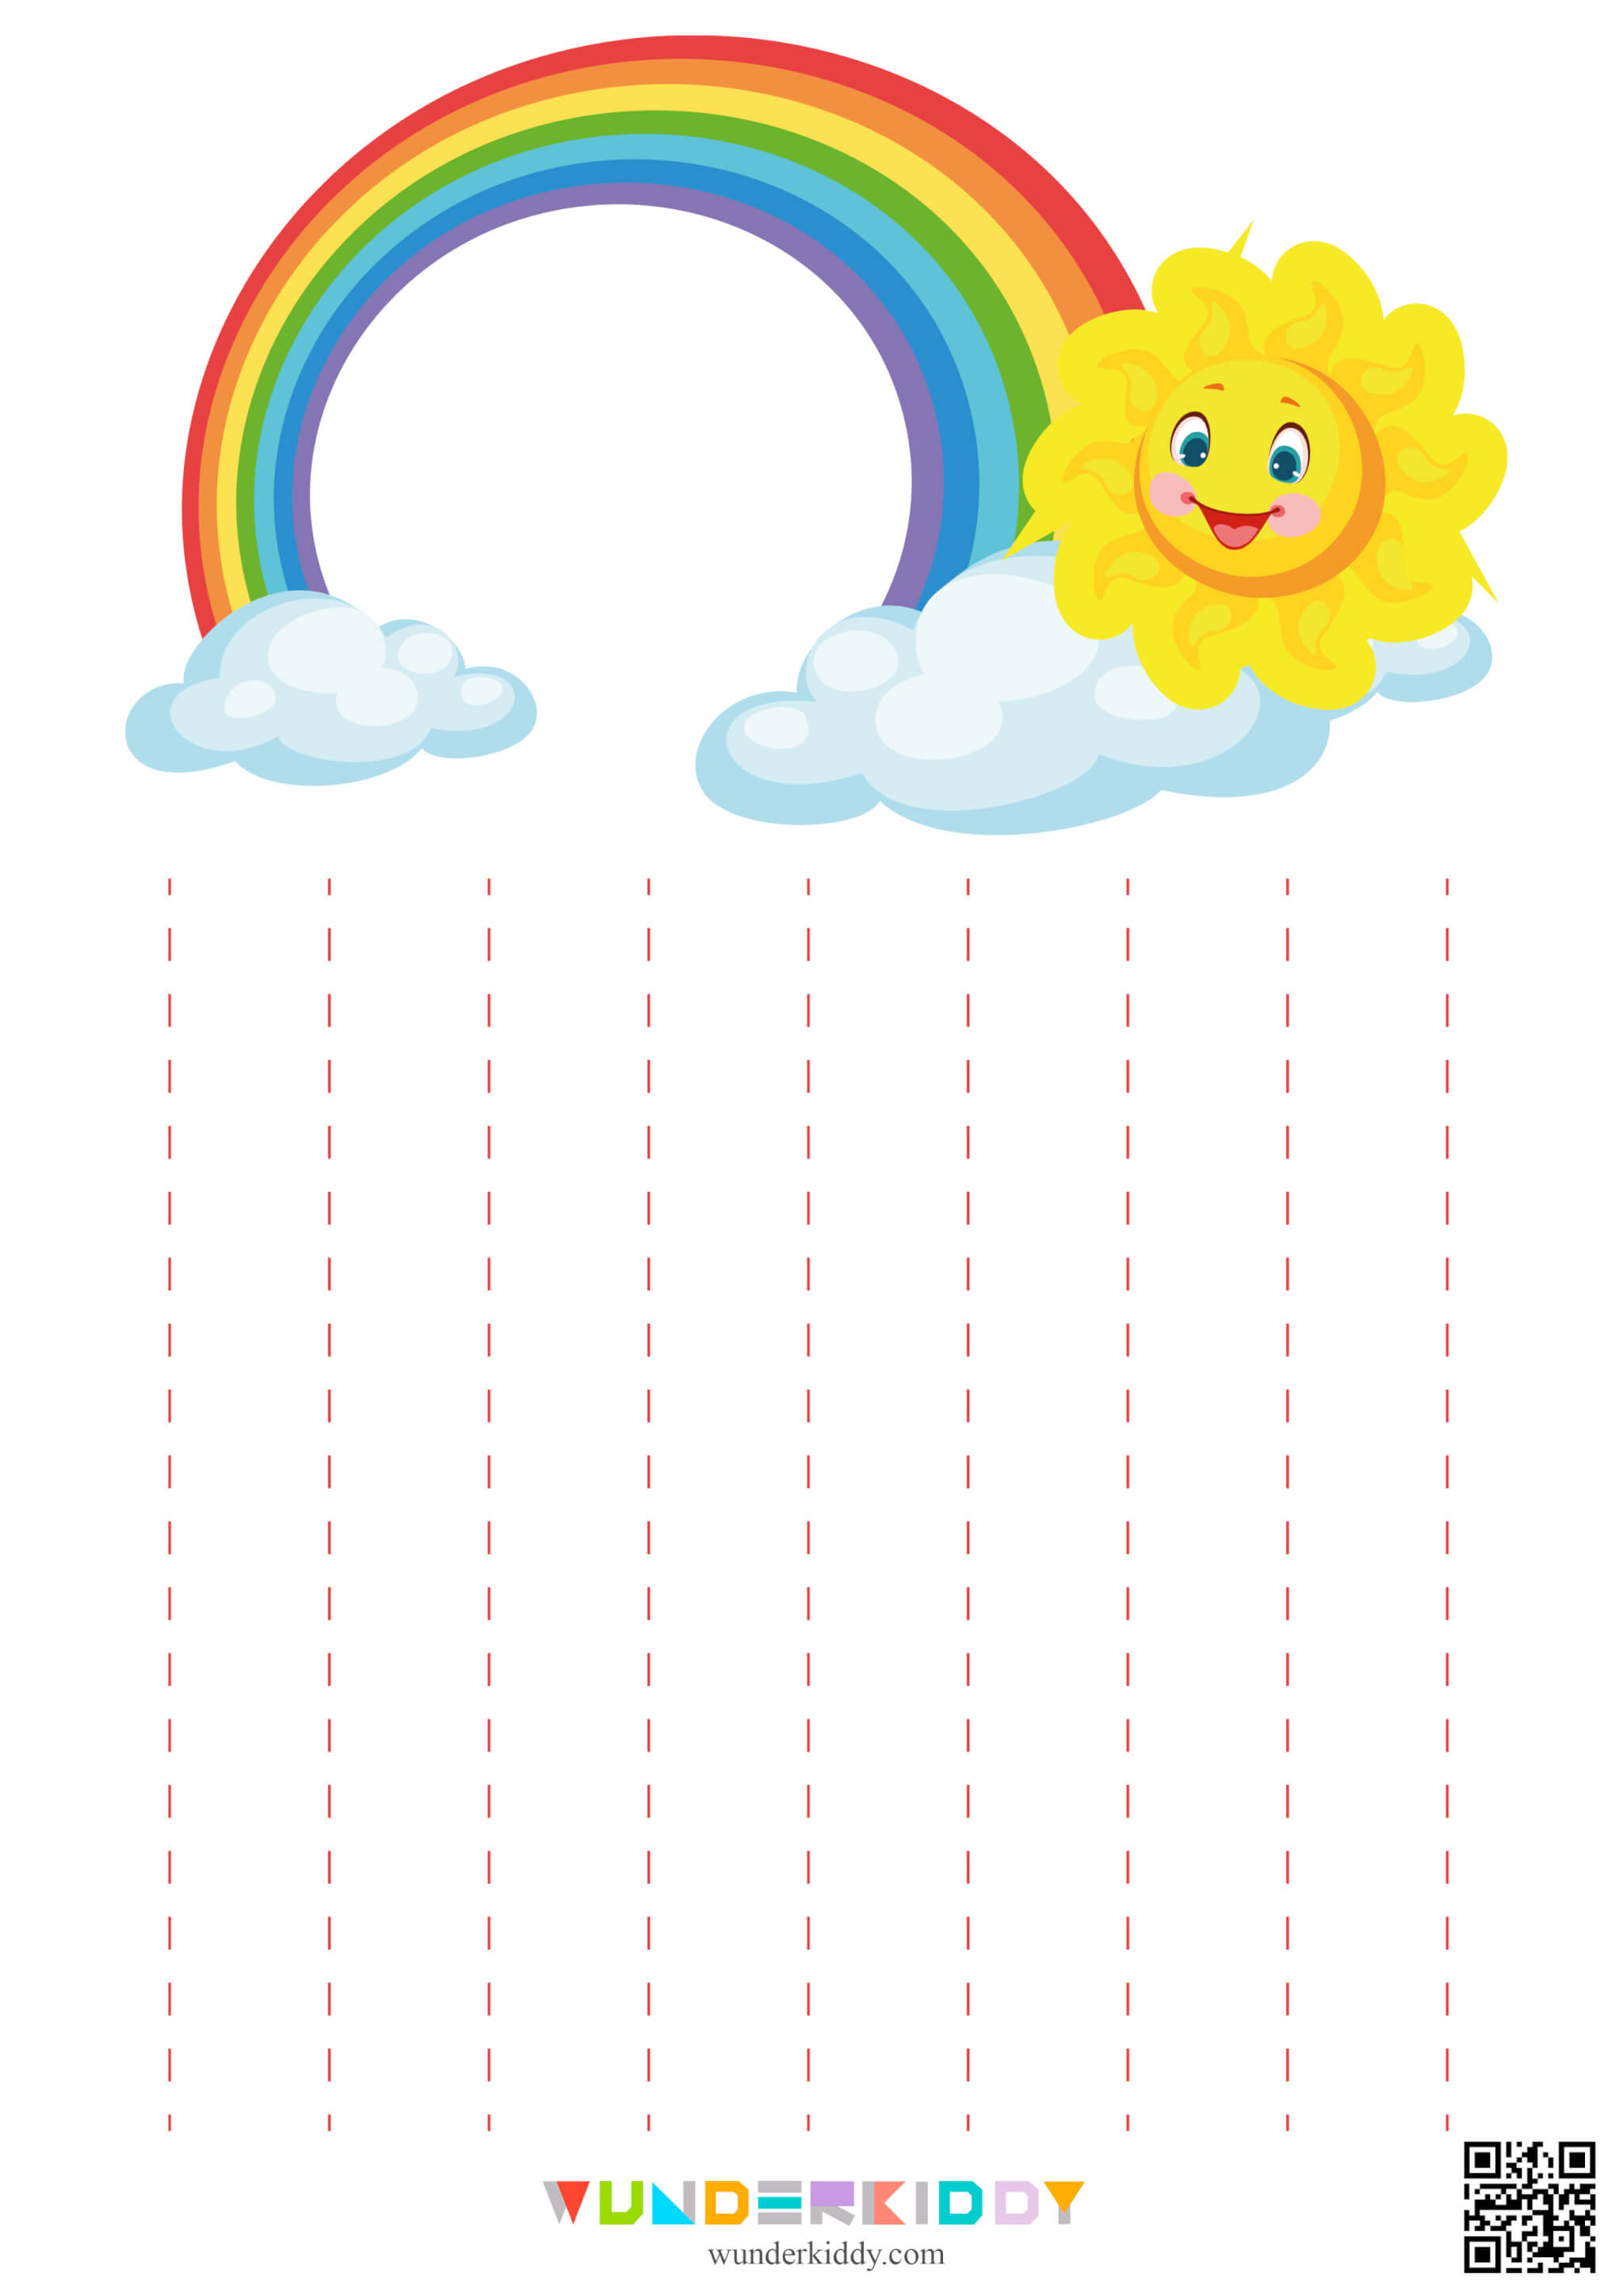 Worksheet for Pre-writing Practice Sun and Rainbow - Image 2